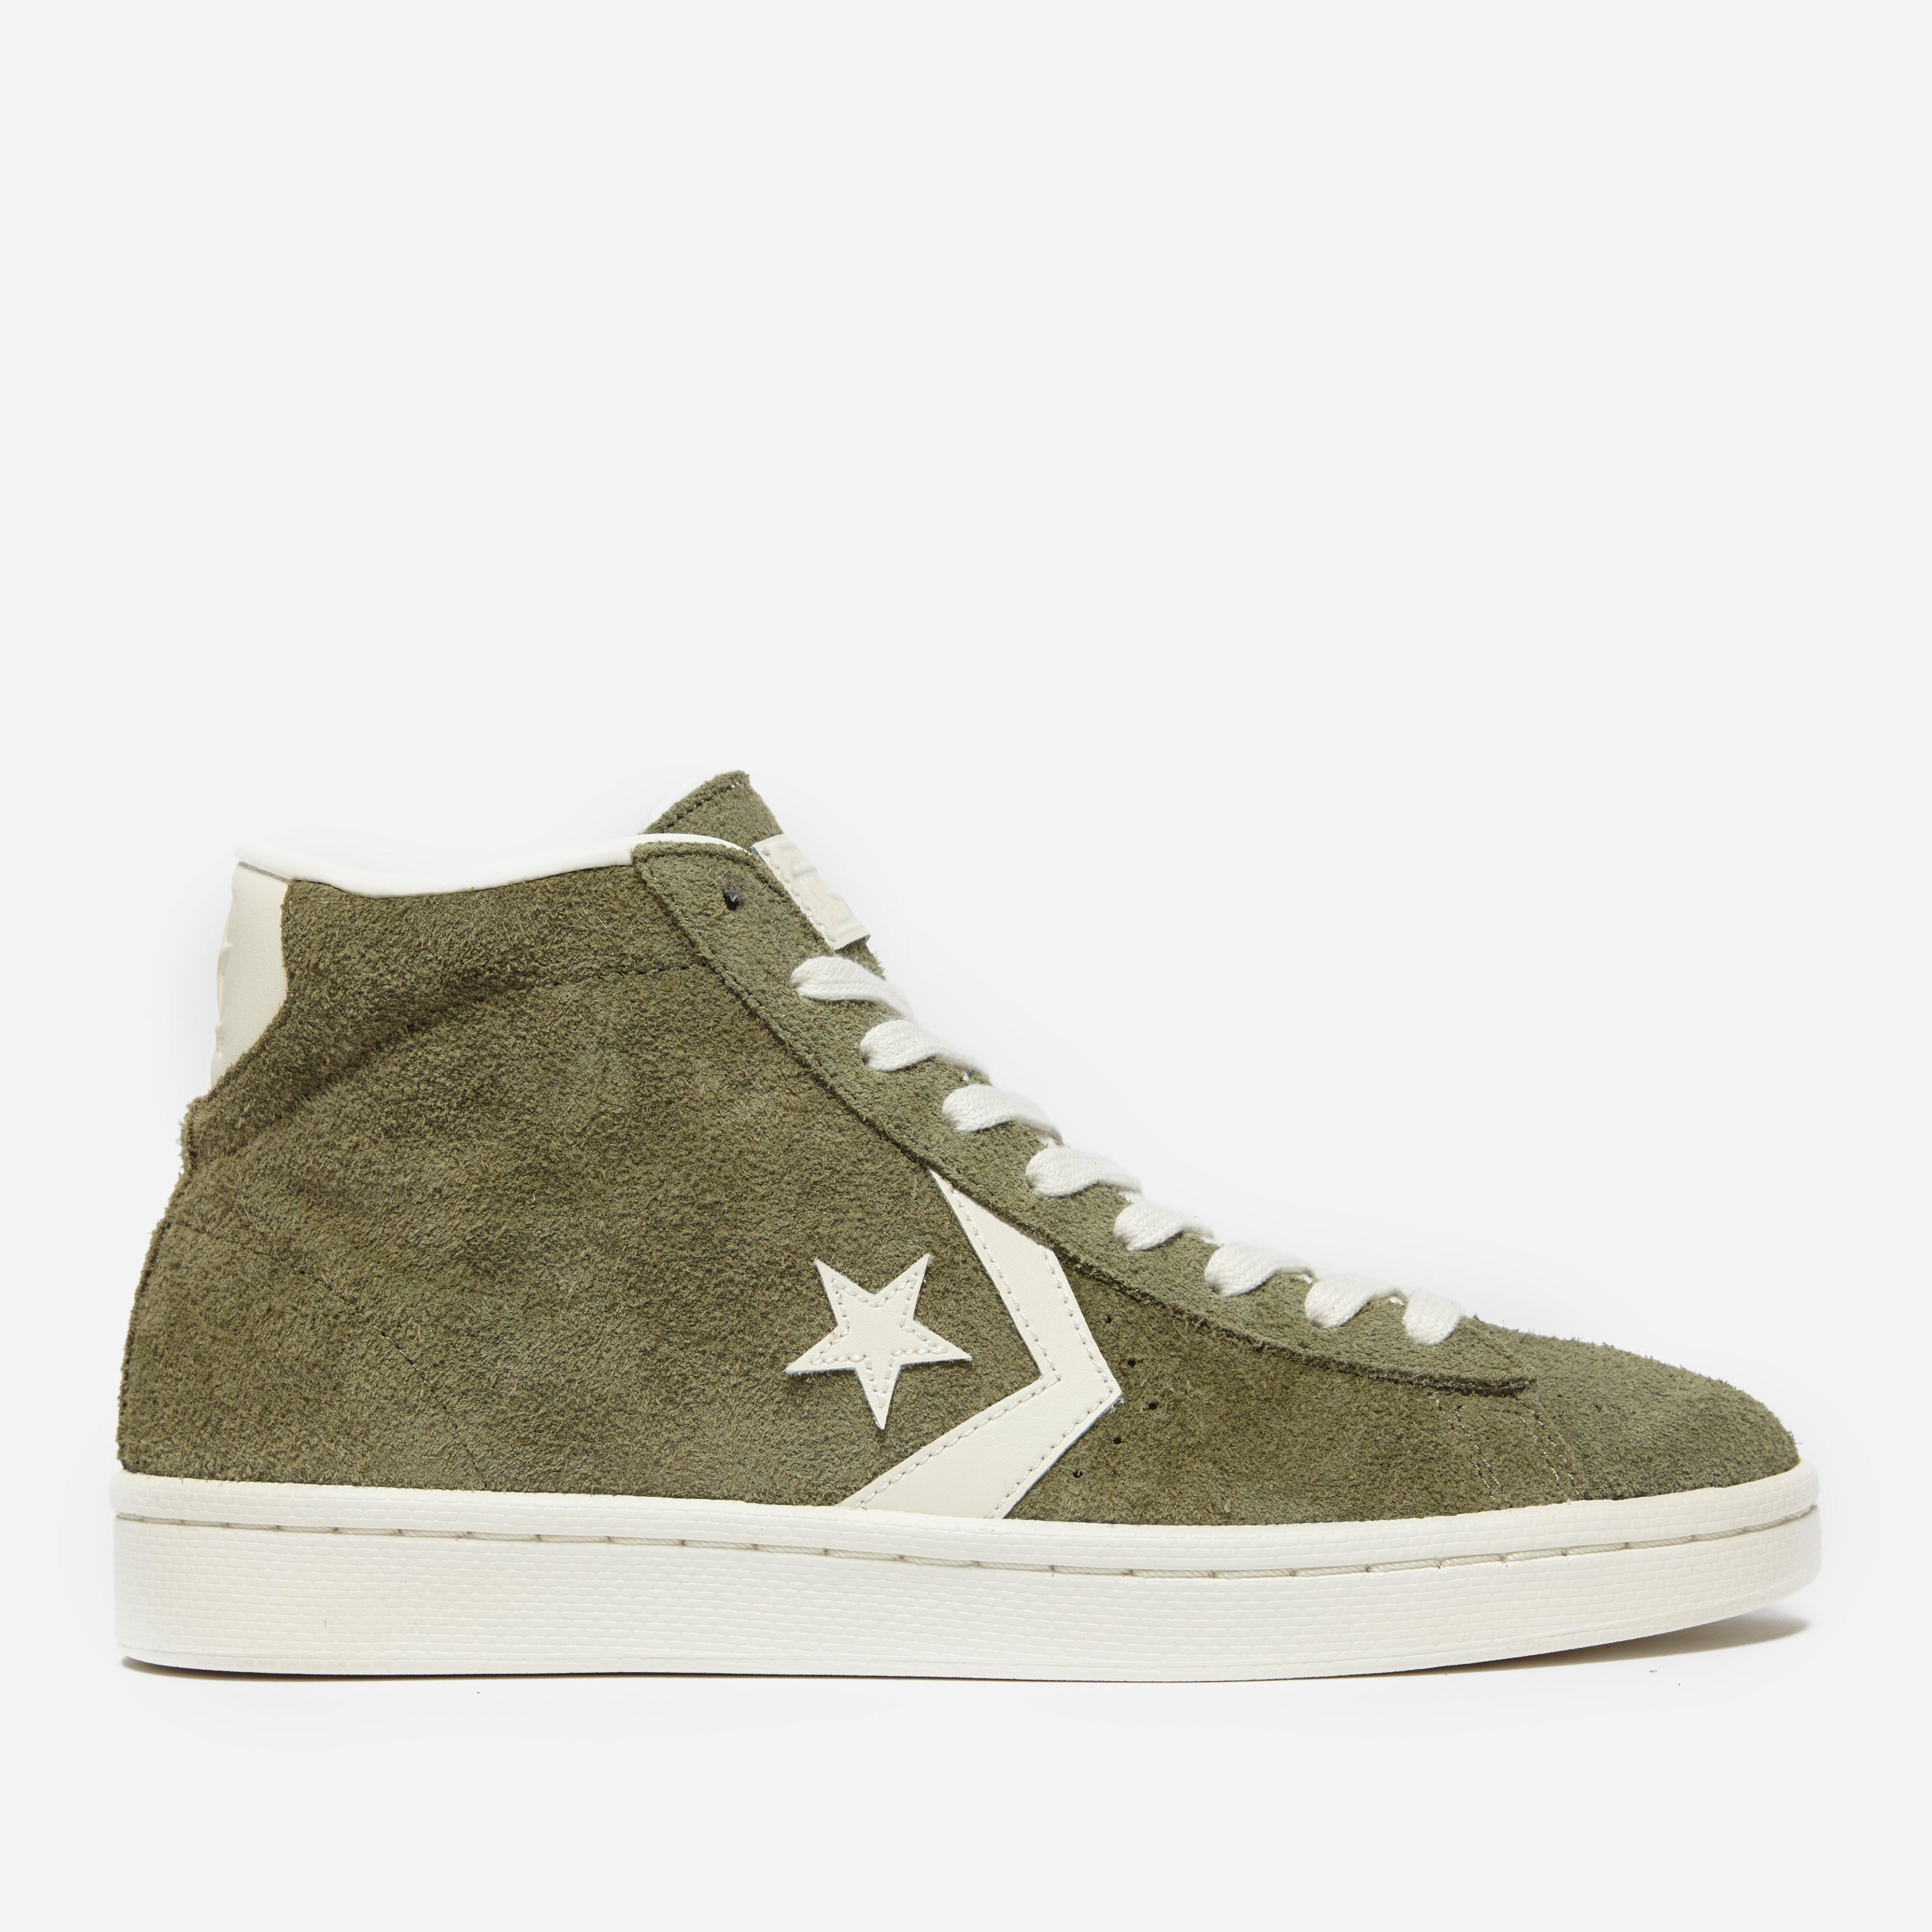 Converse Pro Leather Mid Suede in Olive 